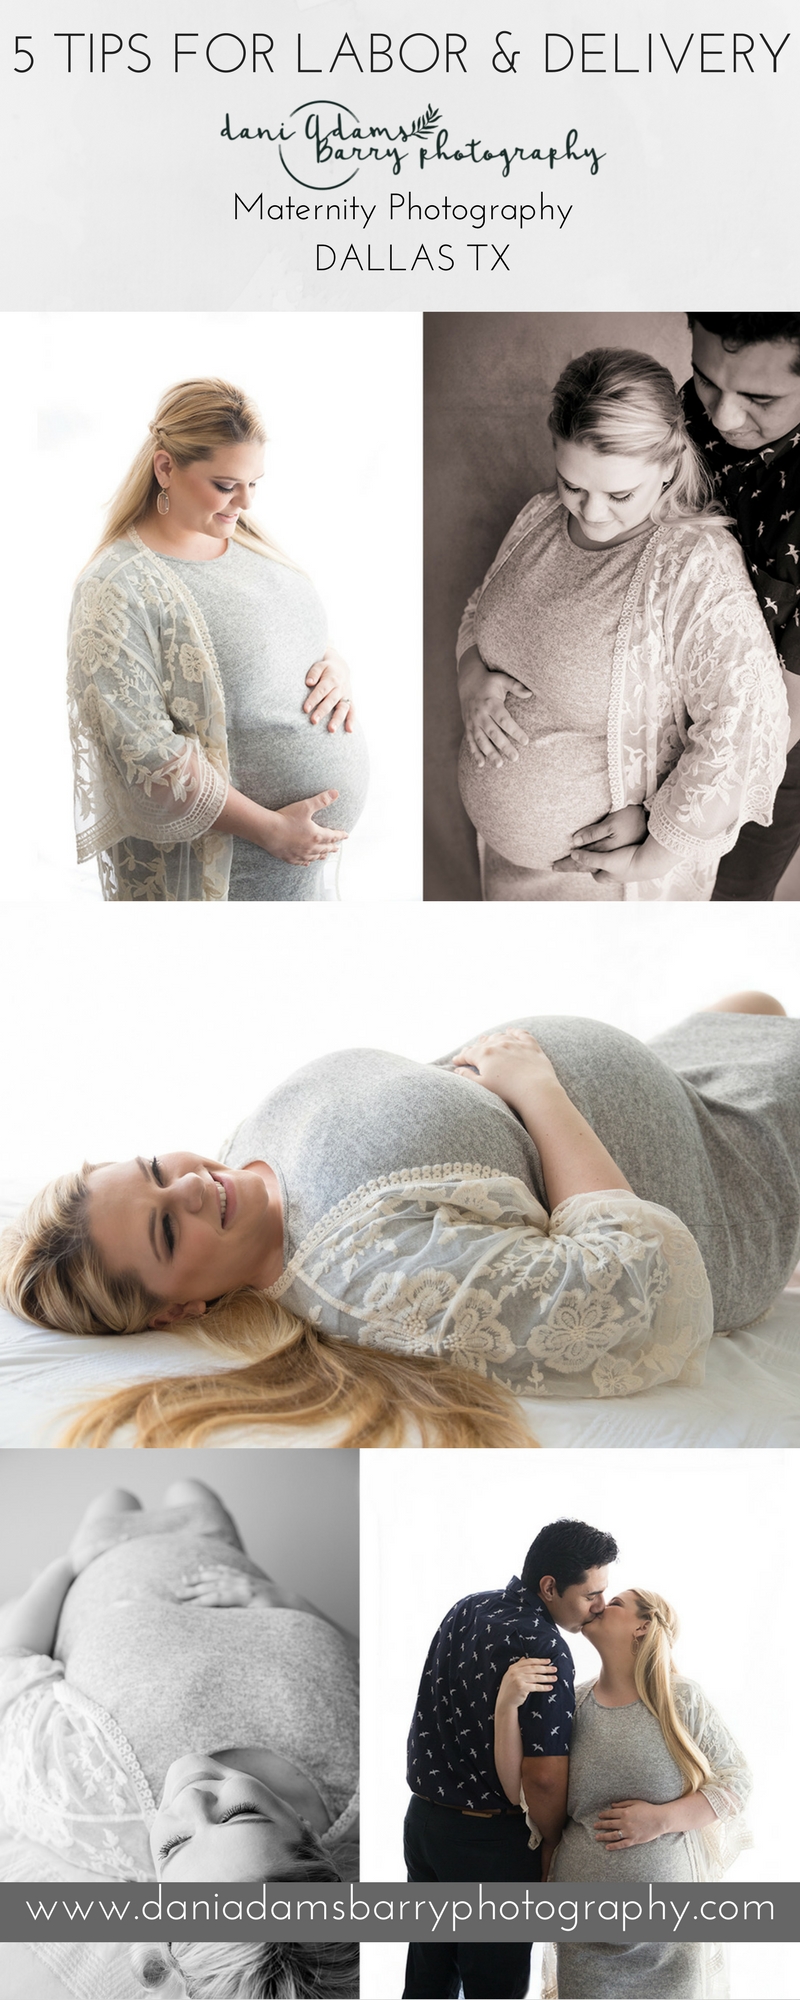 5 Tips for Labor and Delivery- Maternity Photography Dallas TX- Dani Adams Barry Photography